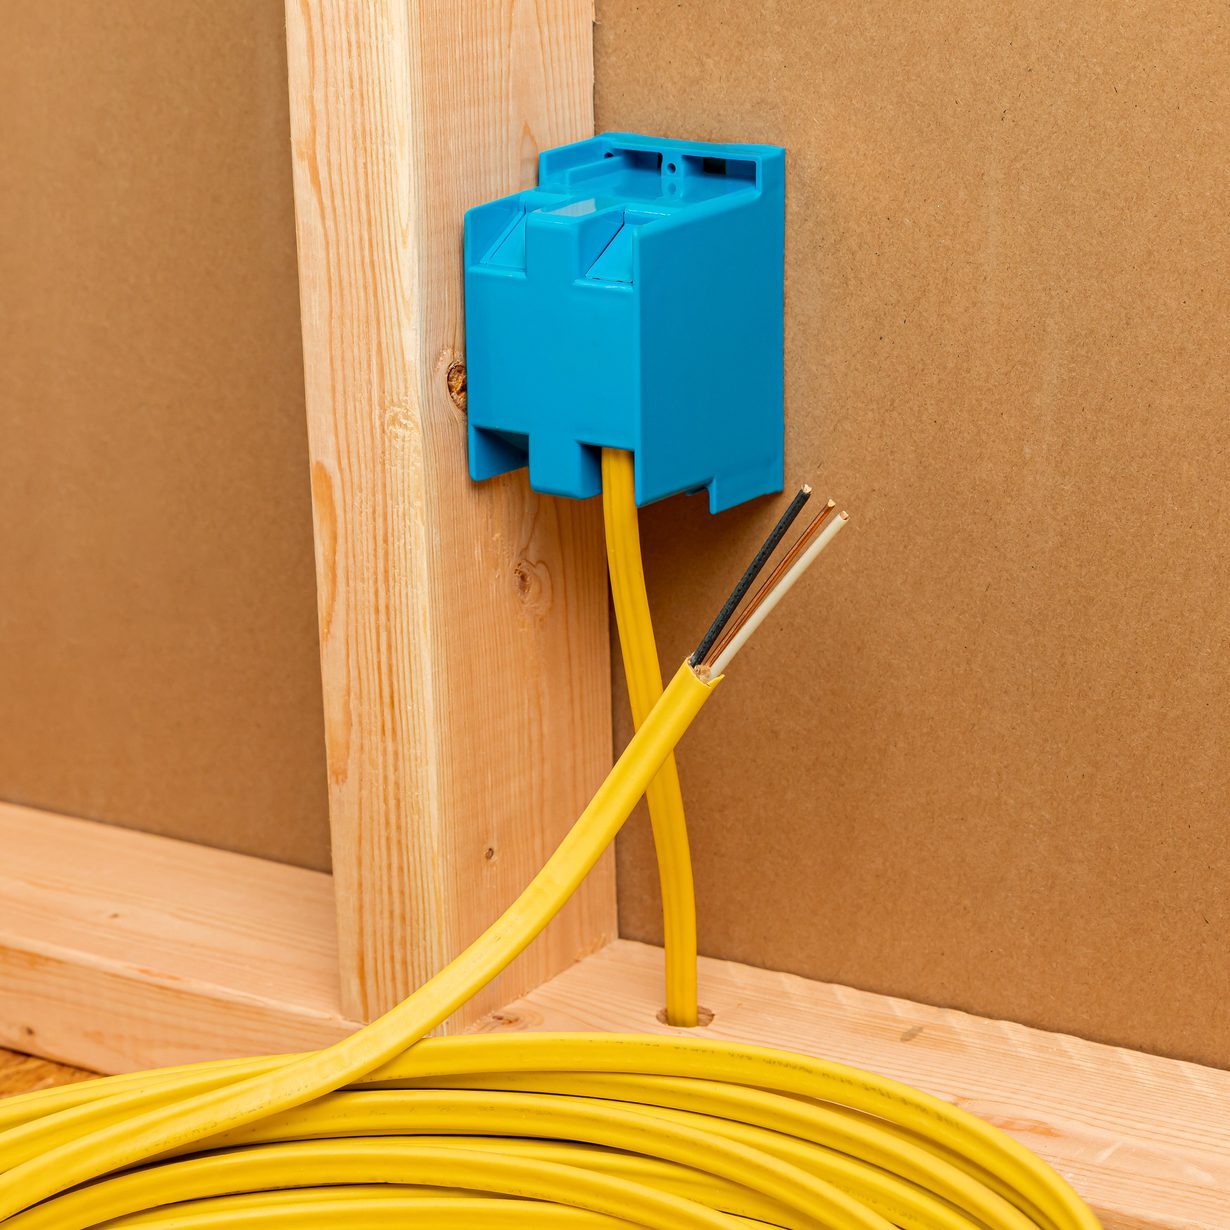 Romex sheathed electrical cable going into a receptacle